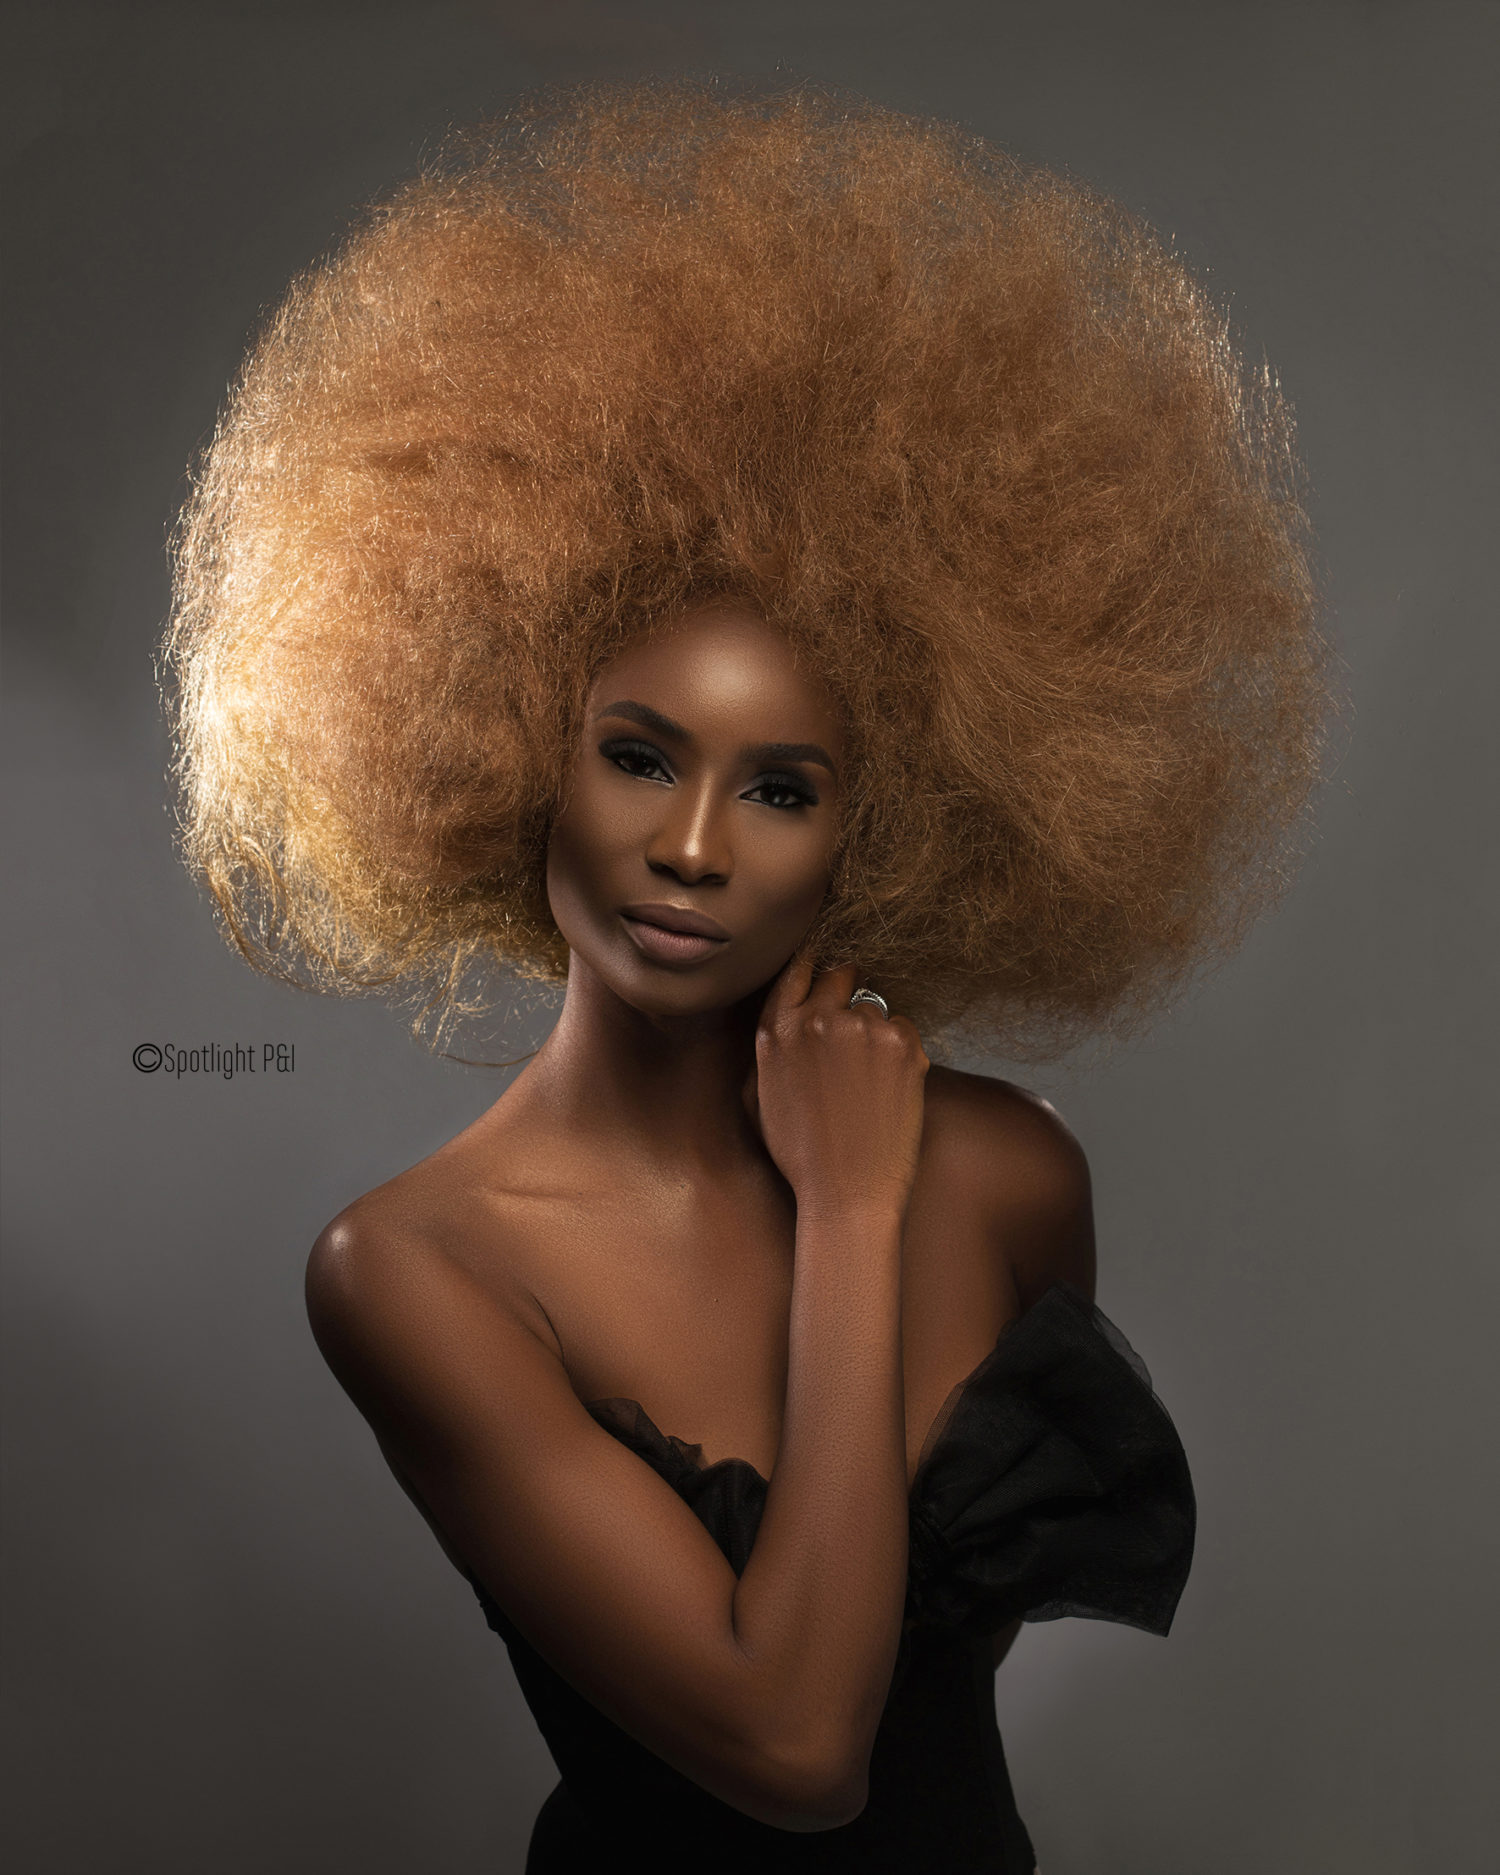 This “Hairditorial” Celebrates The Beauty of Black Hair!